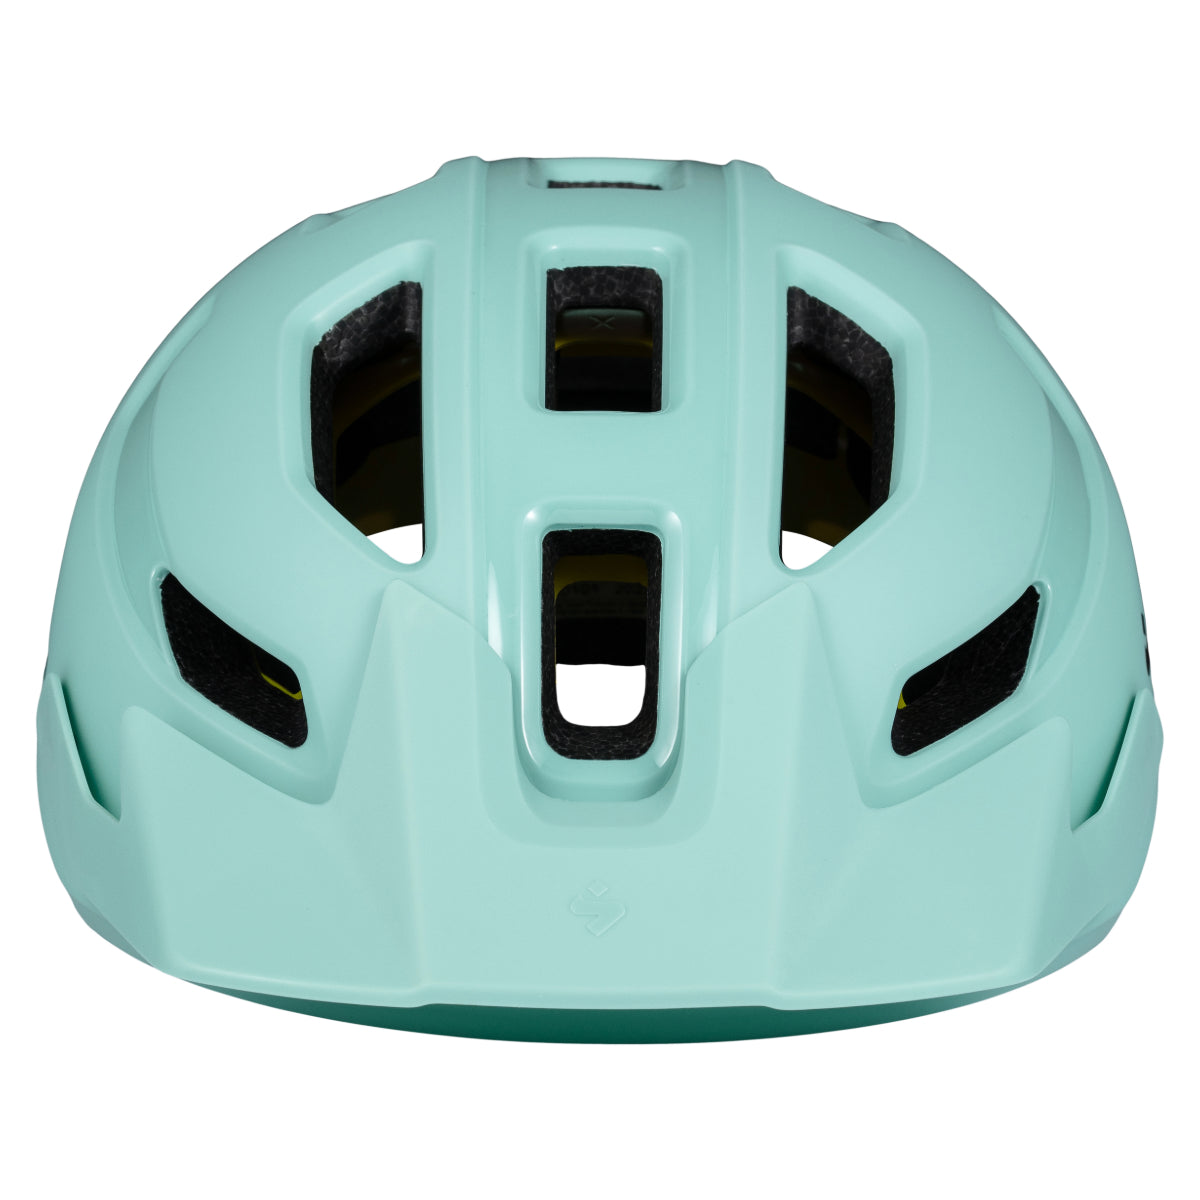 Sweet Protection - Ripper Mips Helmet - Misty Turquoise